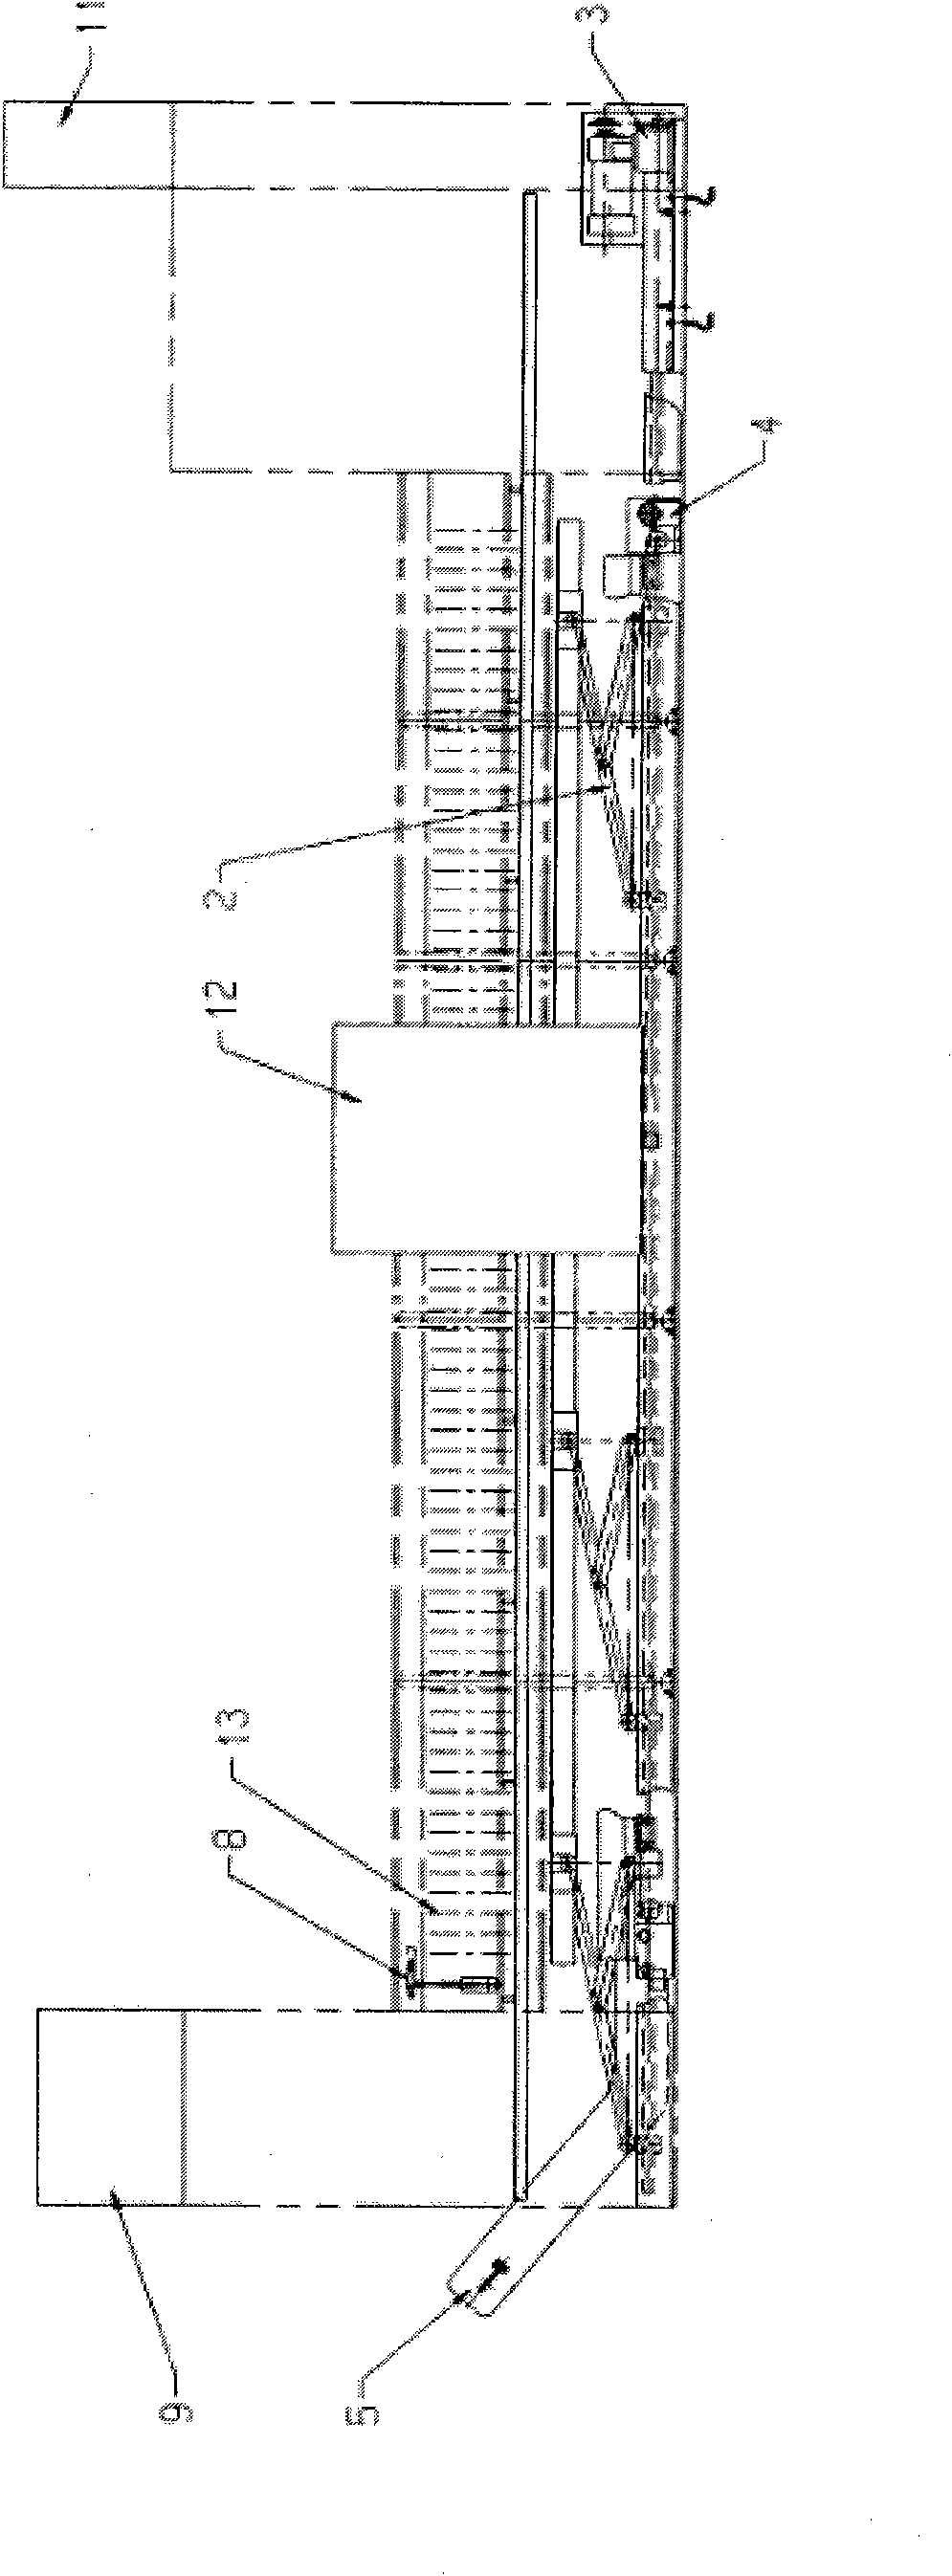 Collective doffing device of ring yarn spinning frame